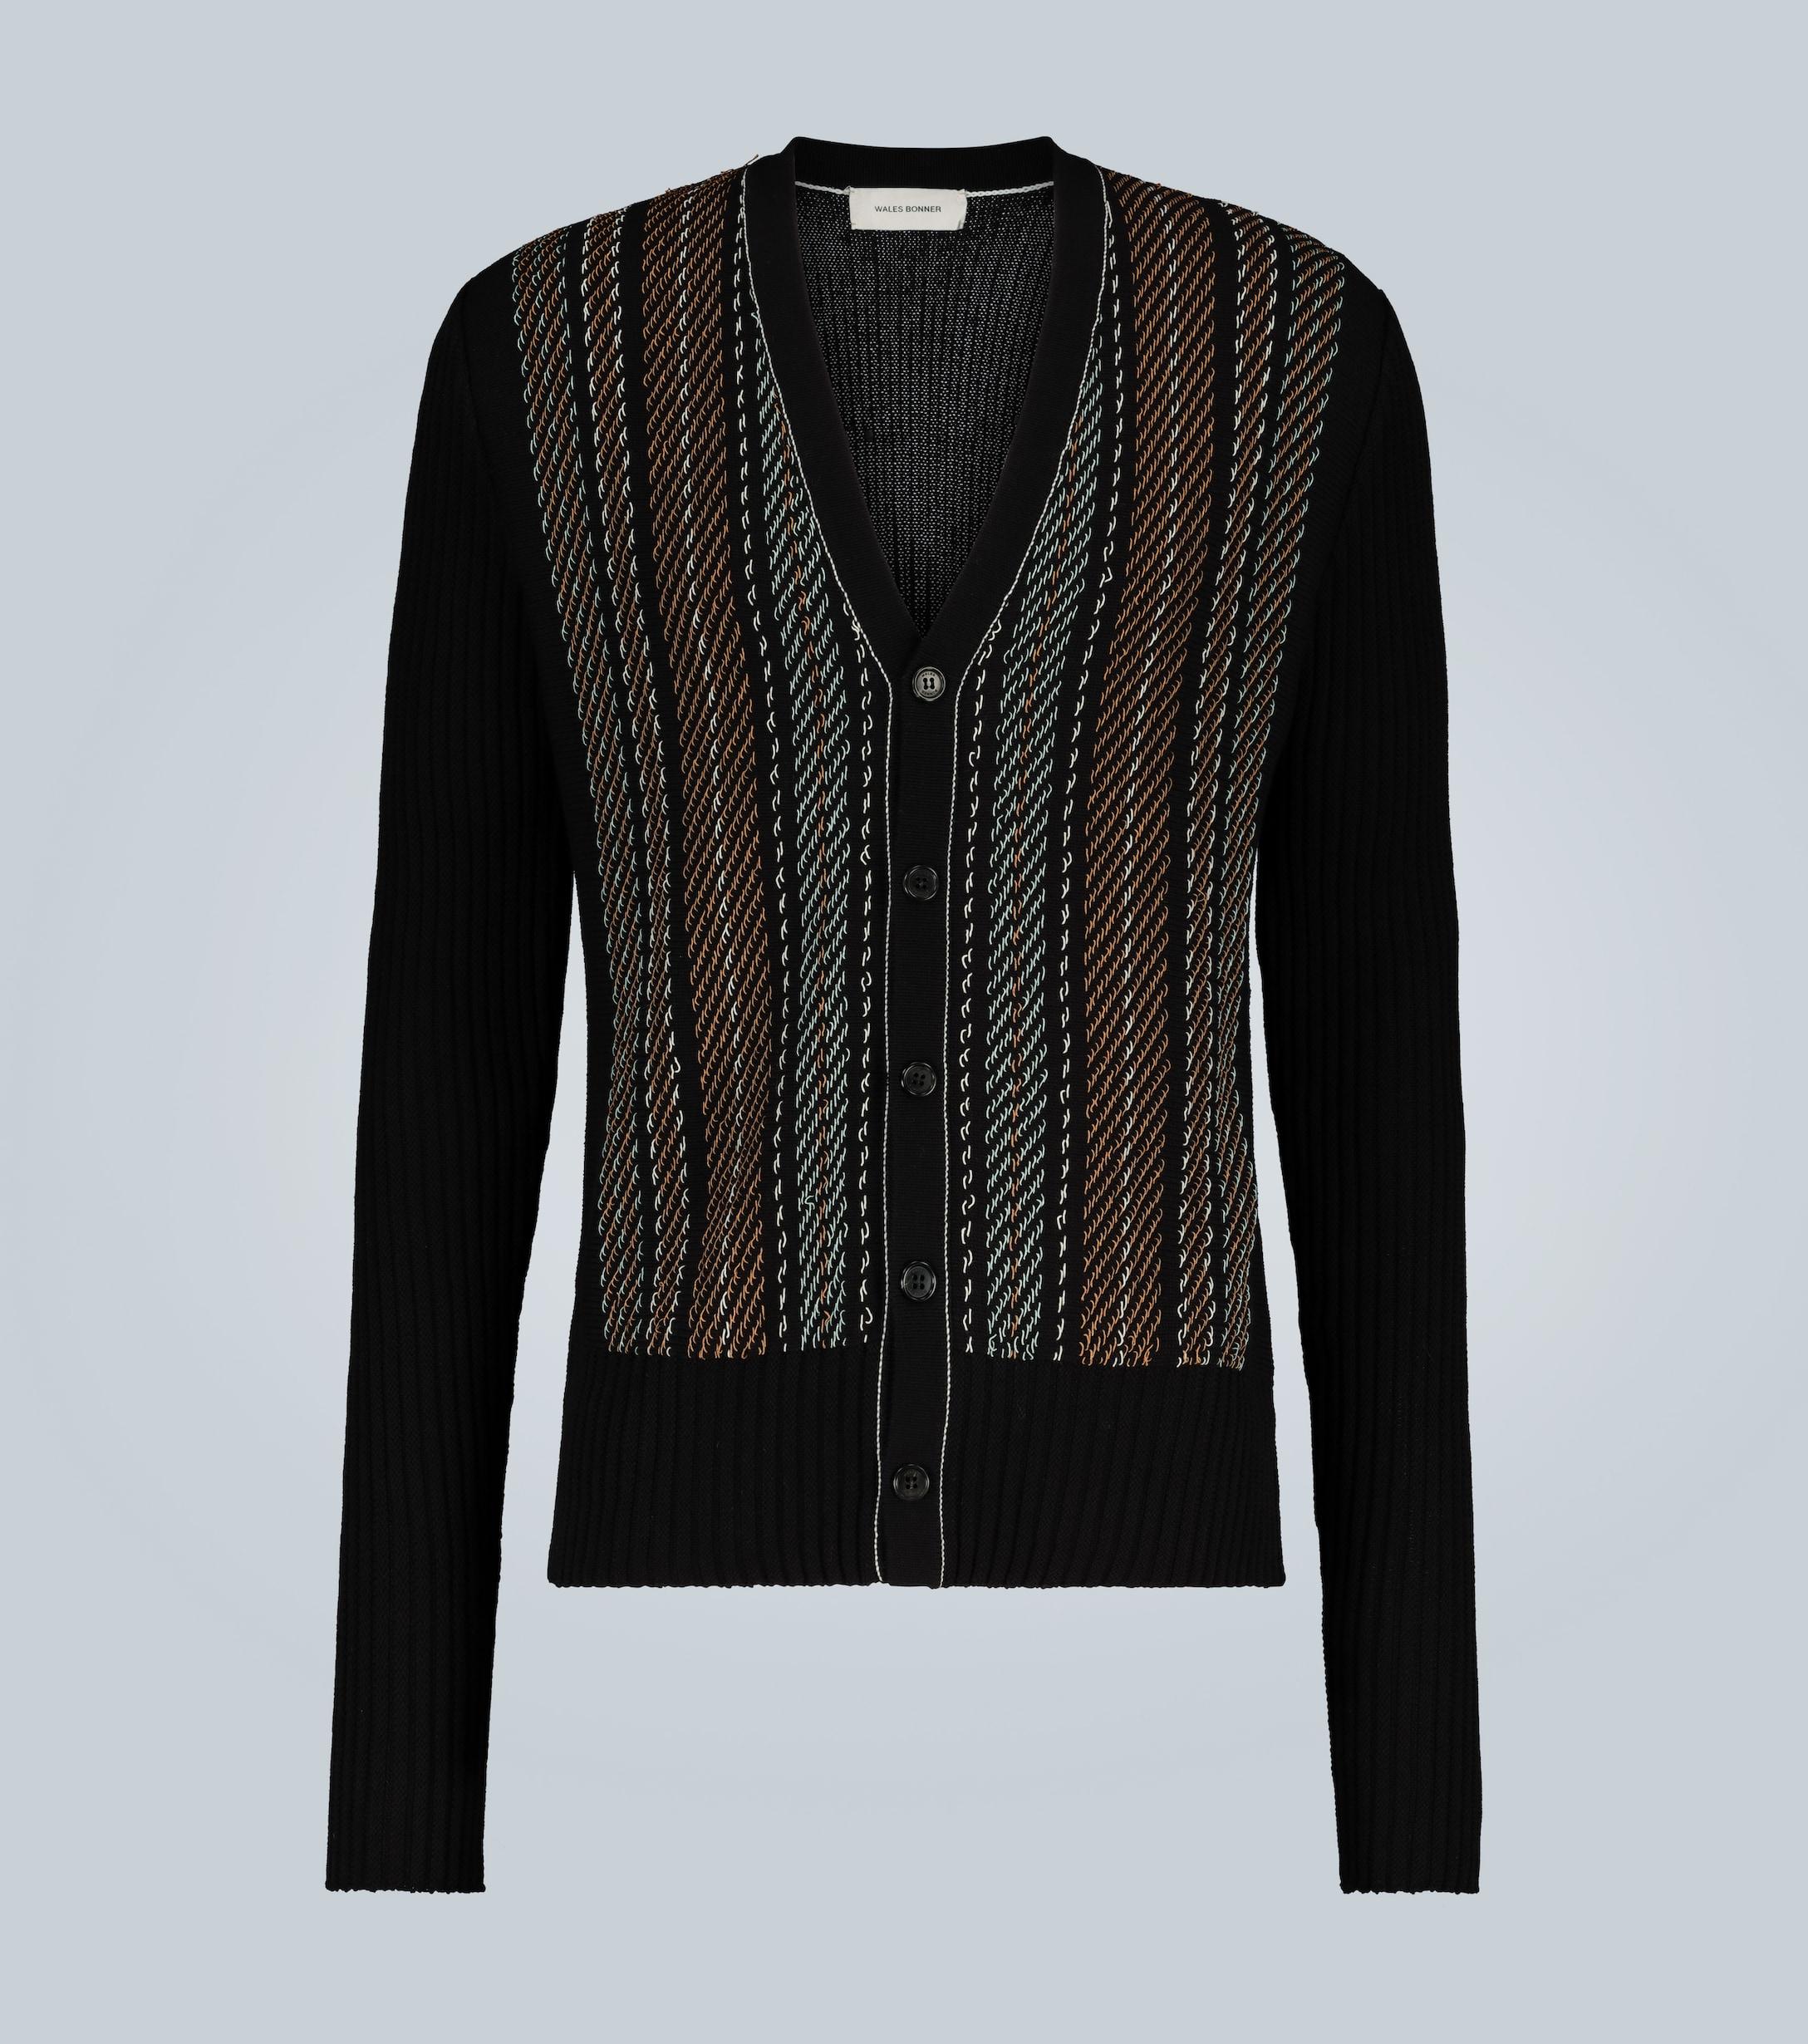 Wales Bonner Embroidered Rib-knit Cardigan in Brown - Lyst